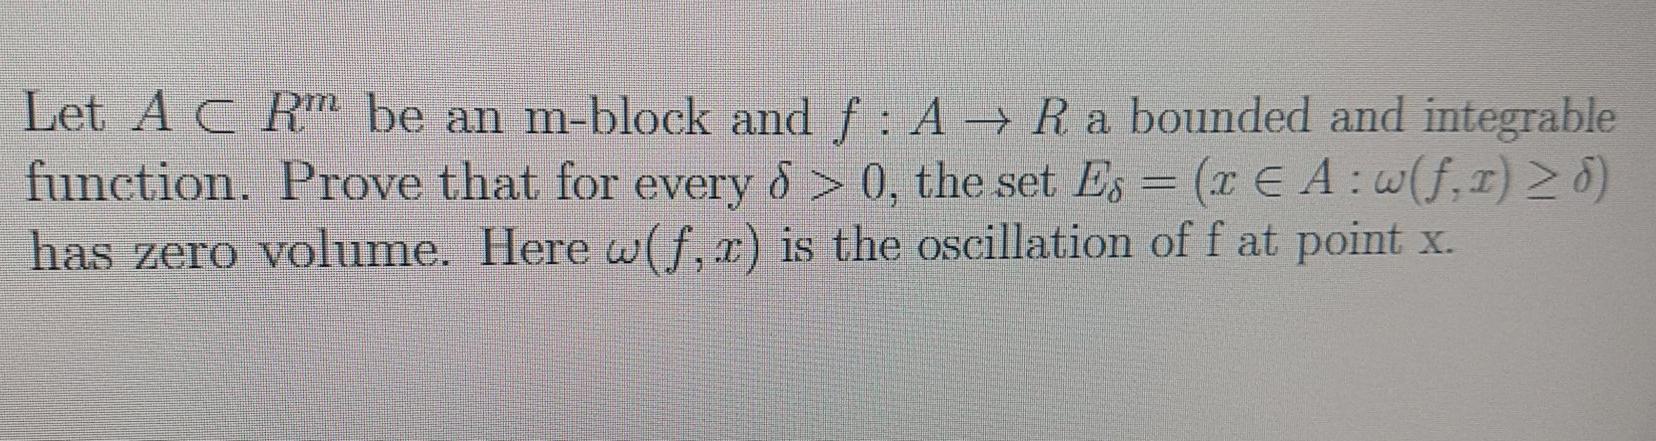 Let A C Rm Be An M Block And F A R A Bounded And Integrable Function Prove That For Every D 0 The Set Es 1 E 1